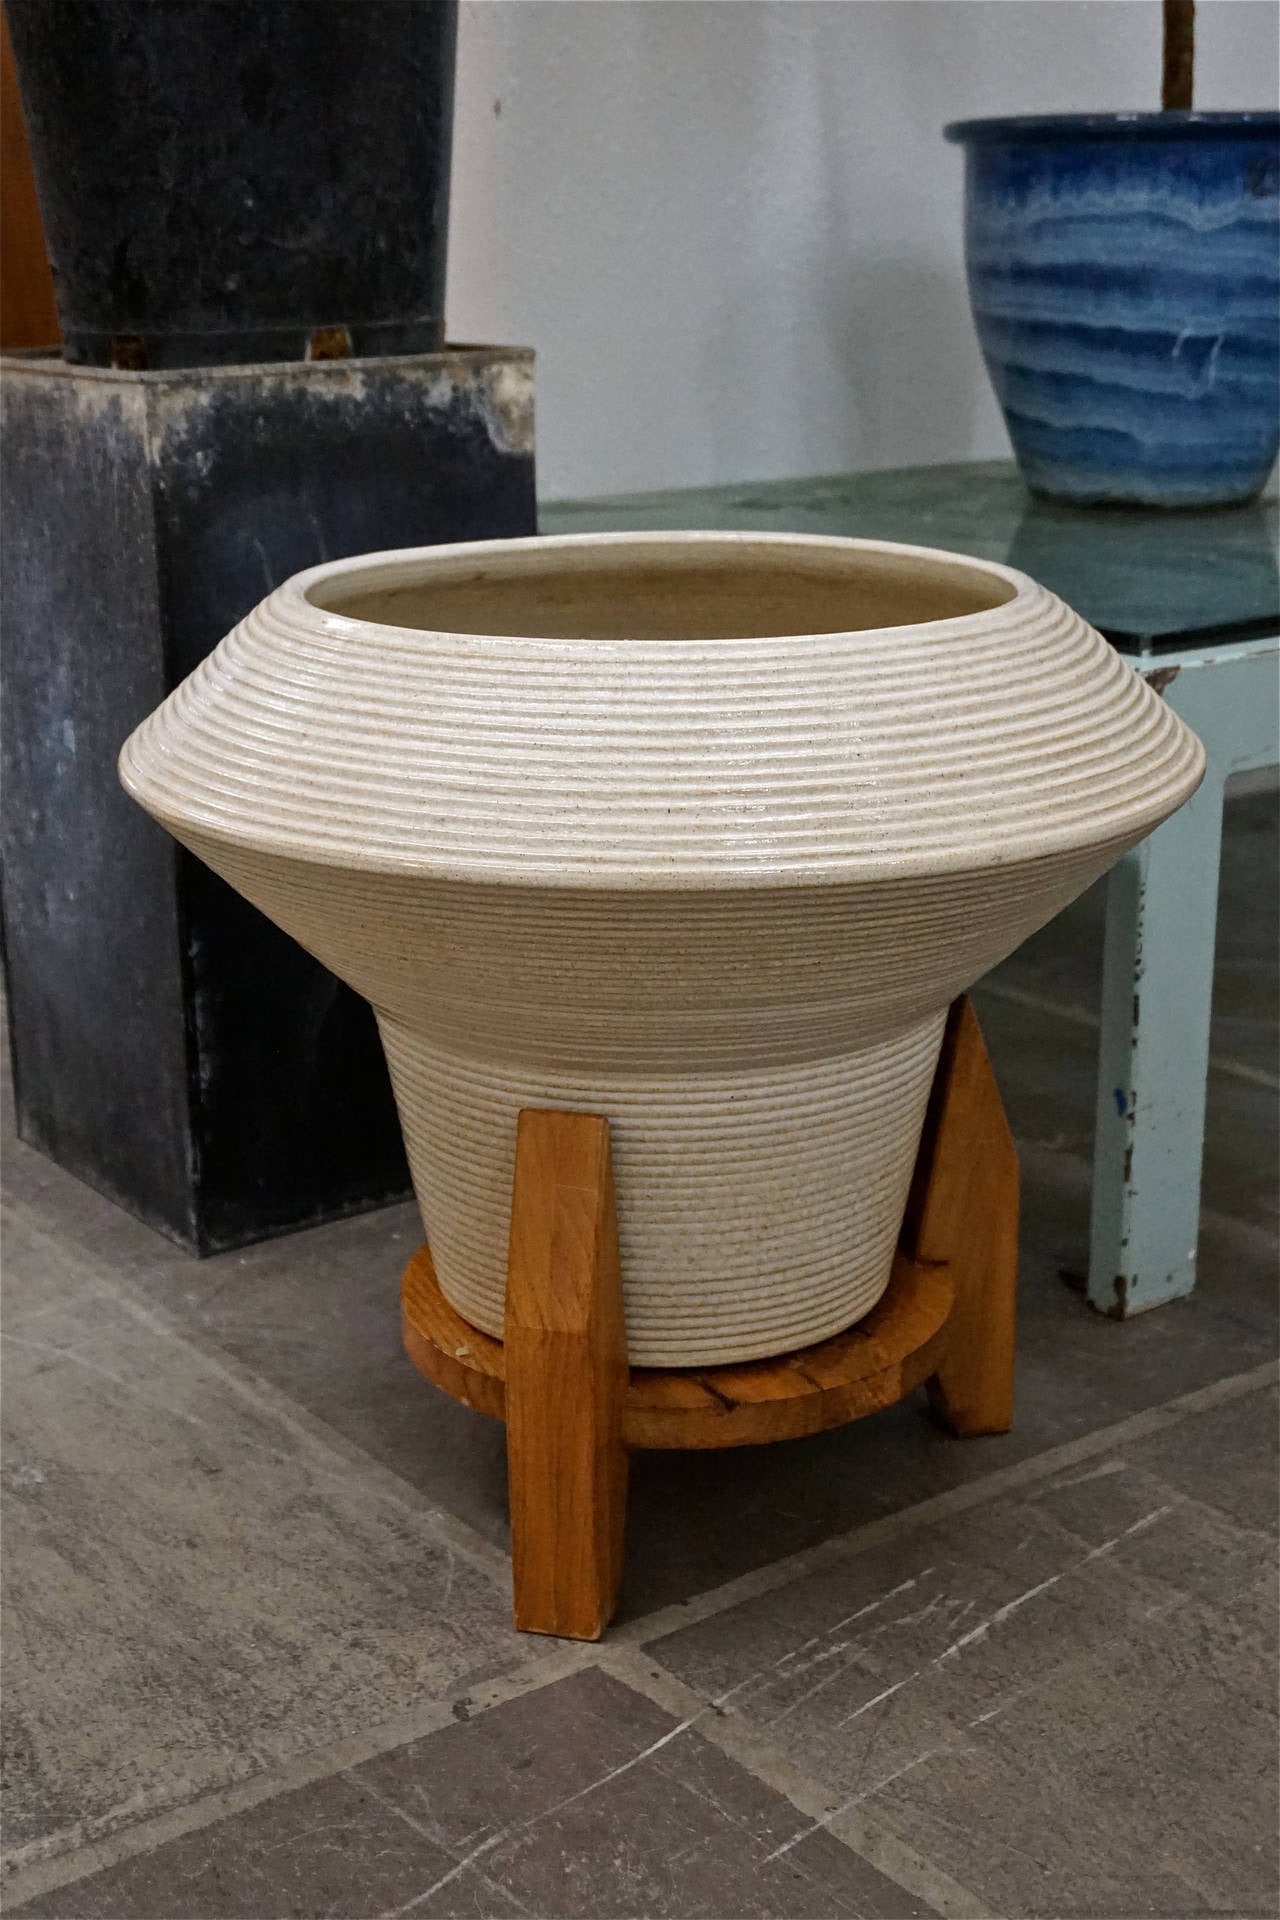 Beautifully designed pot for indoor or outdoor use.